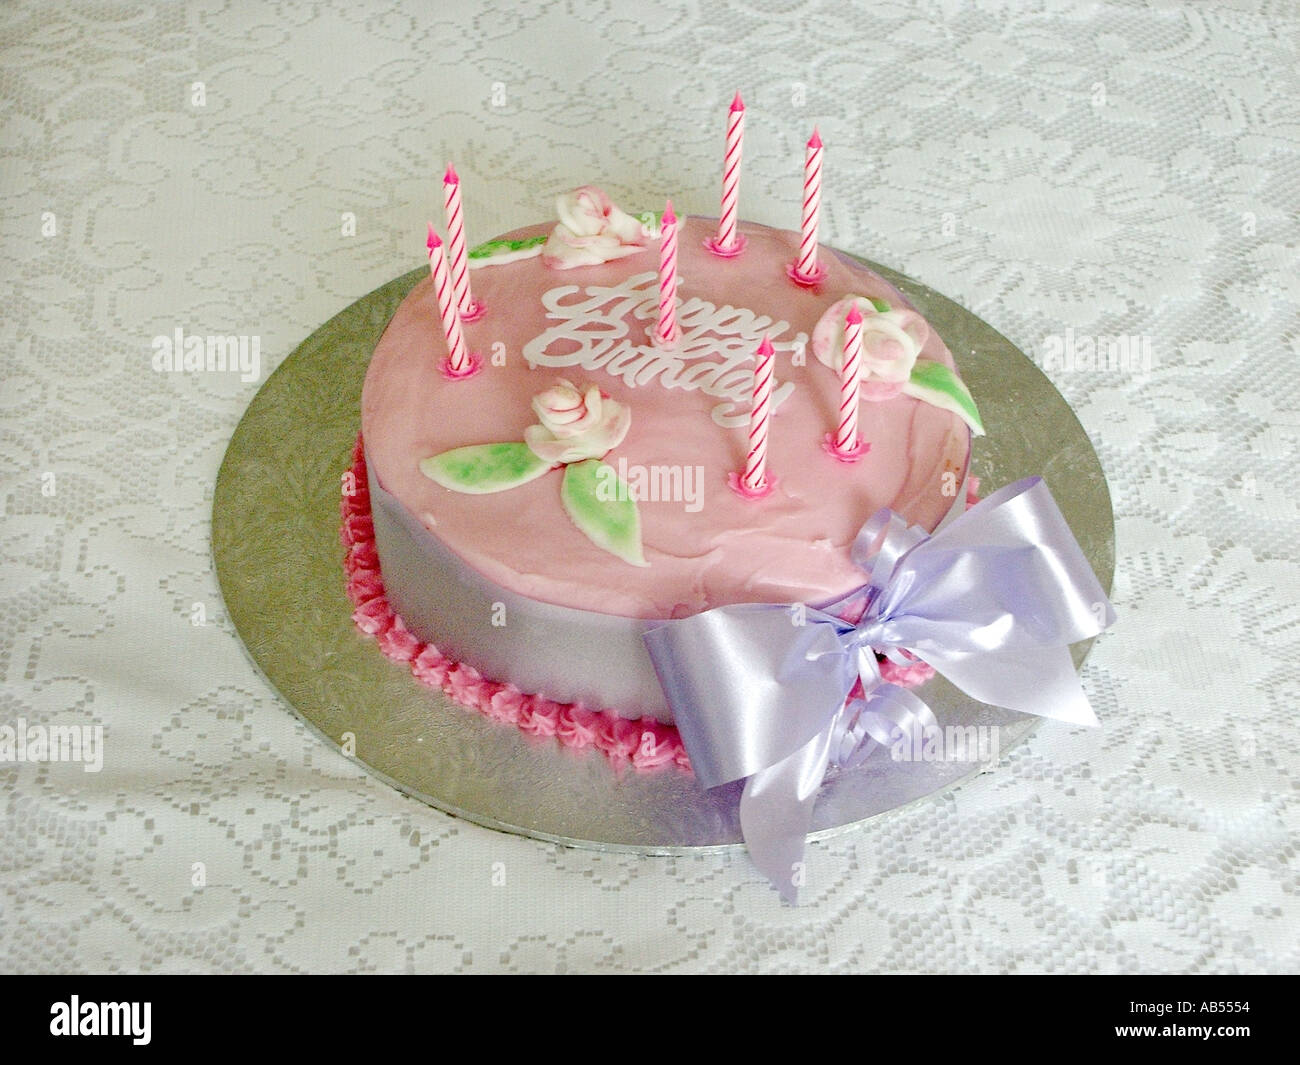 Birthday cake for 7 seven year old child Stock Photo